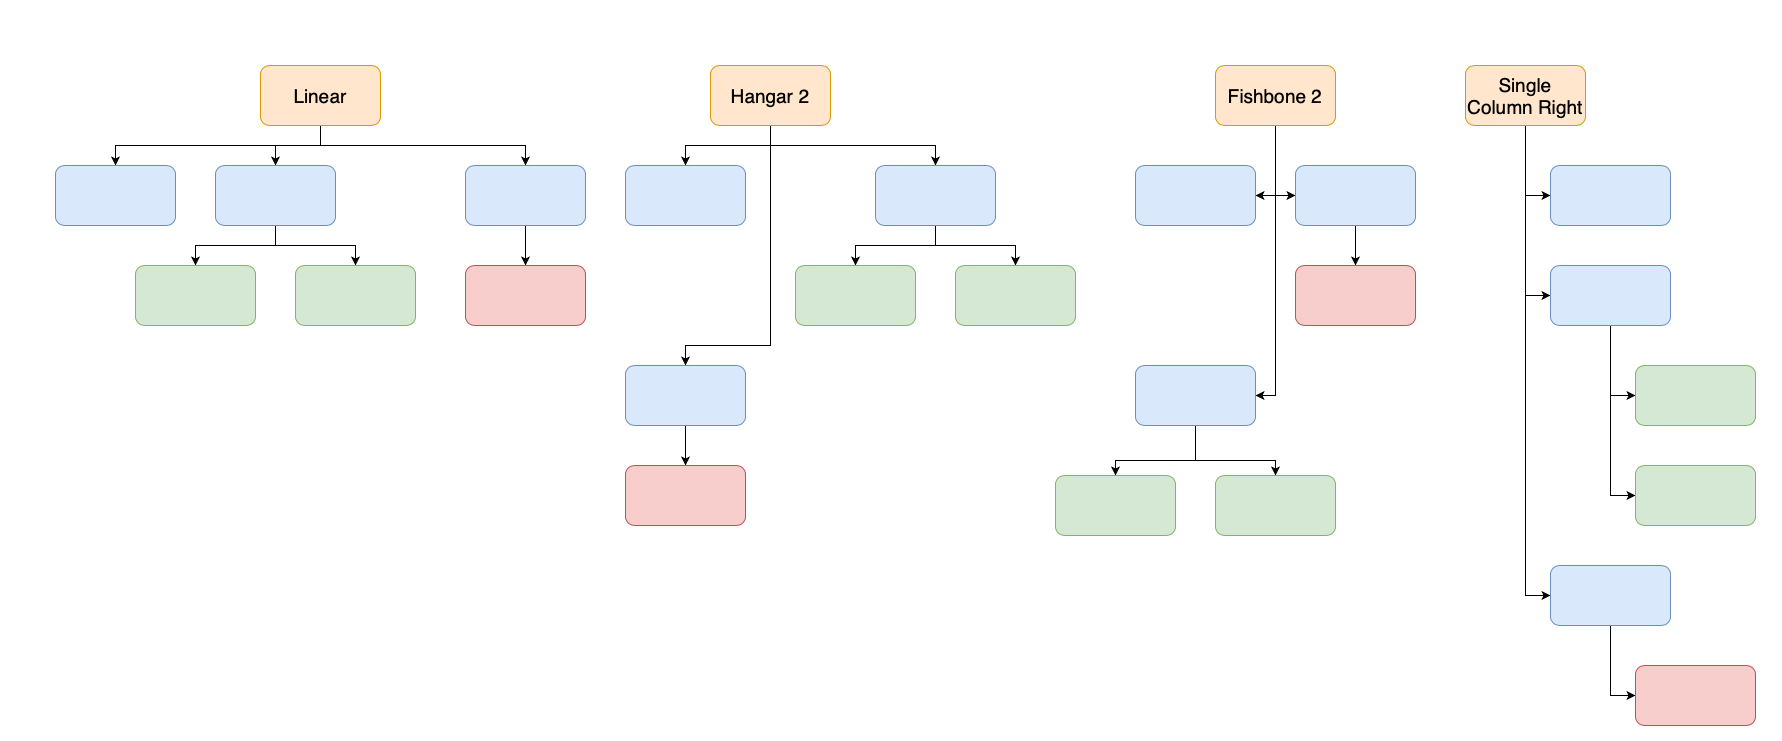 Apply a layout via Arrange > Layout > Org Chart to automatically rearrange the shapes and connectors in various common org charts